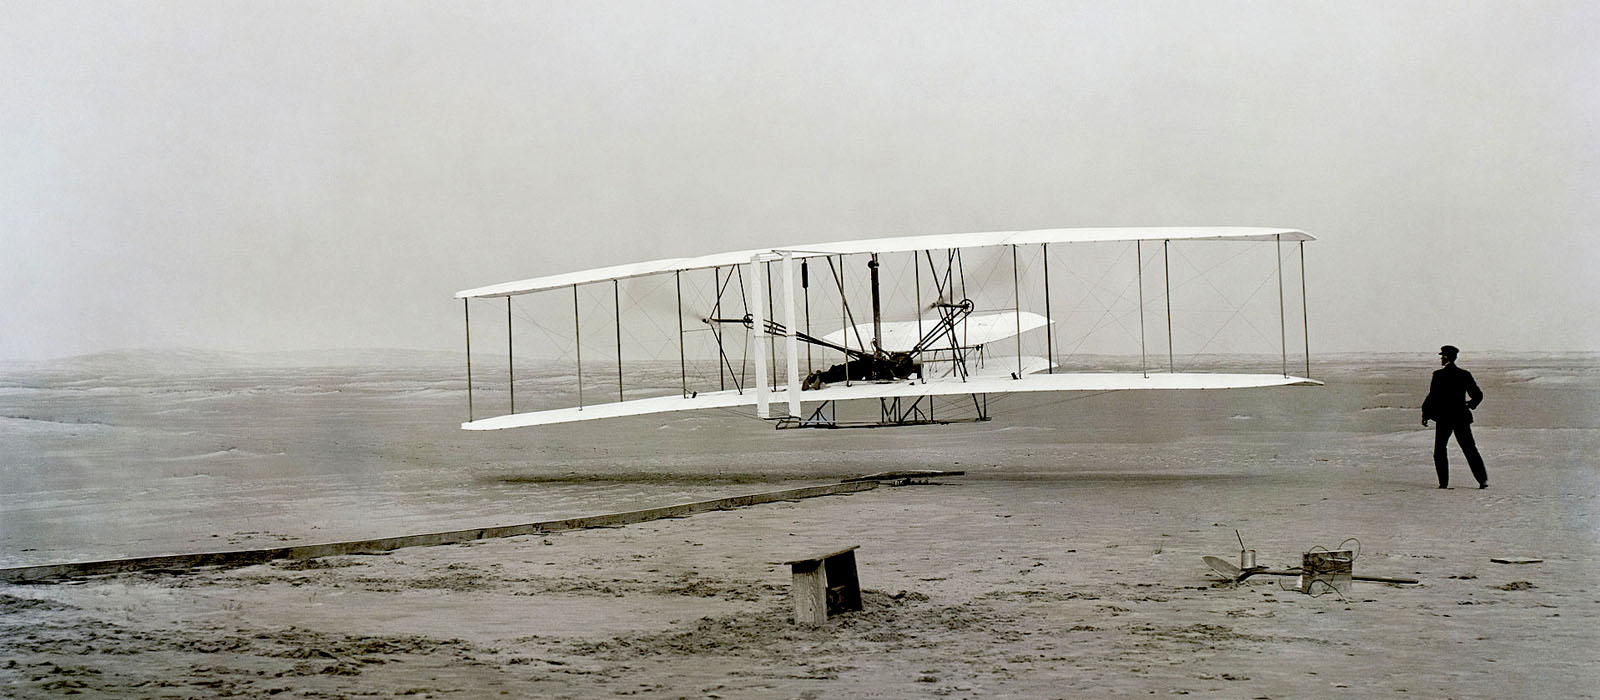 5 Lessons From the Wright Brothers and the Power of Purpose